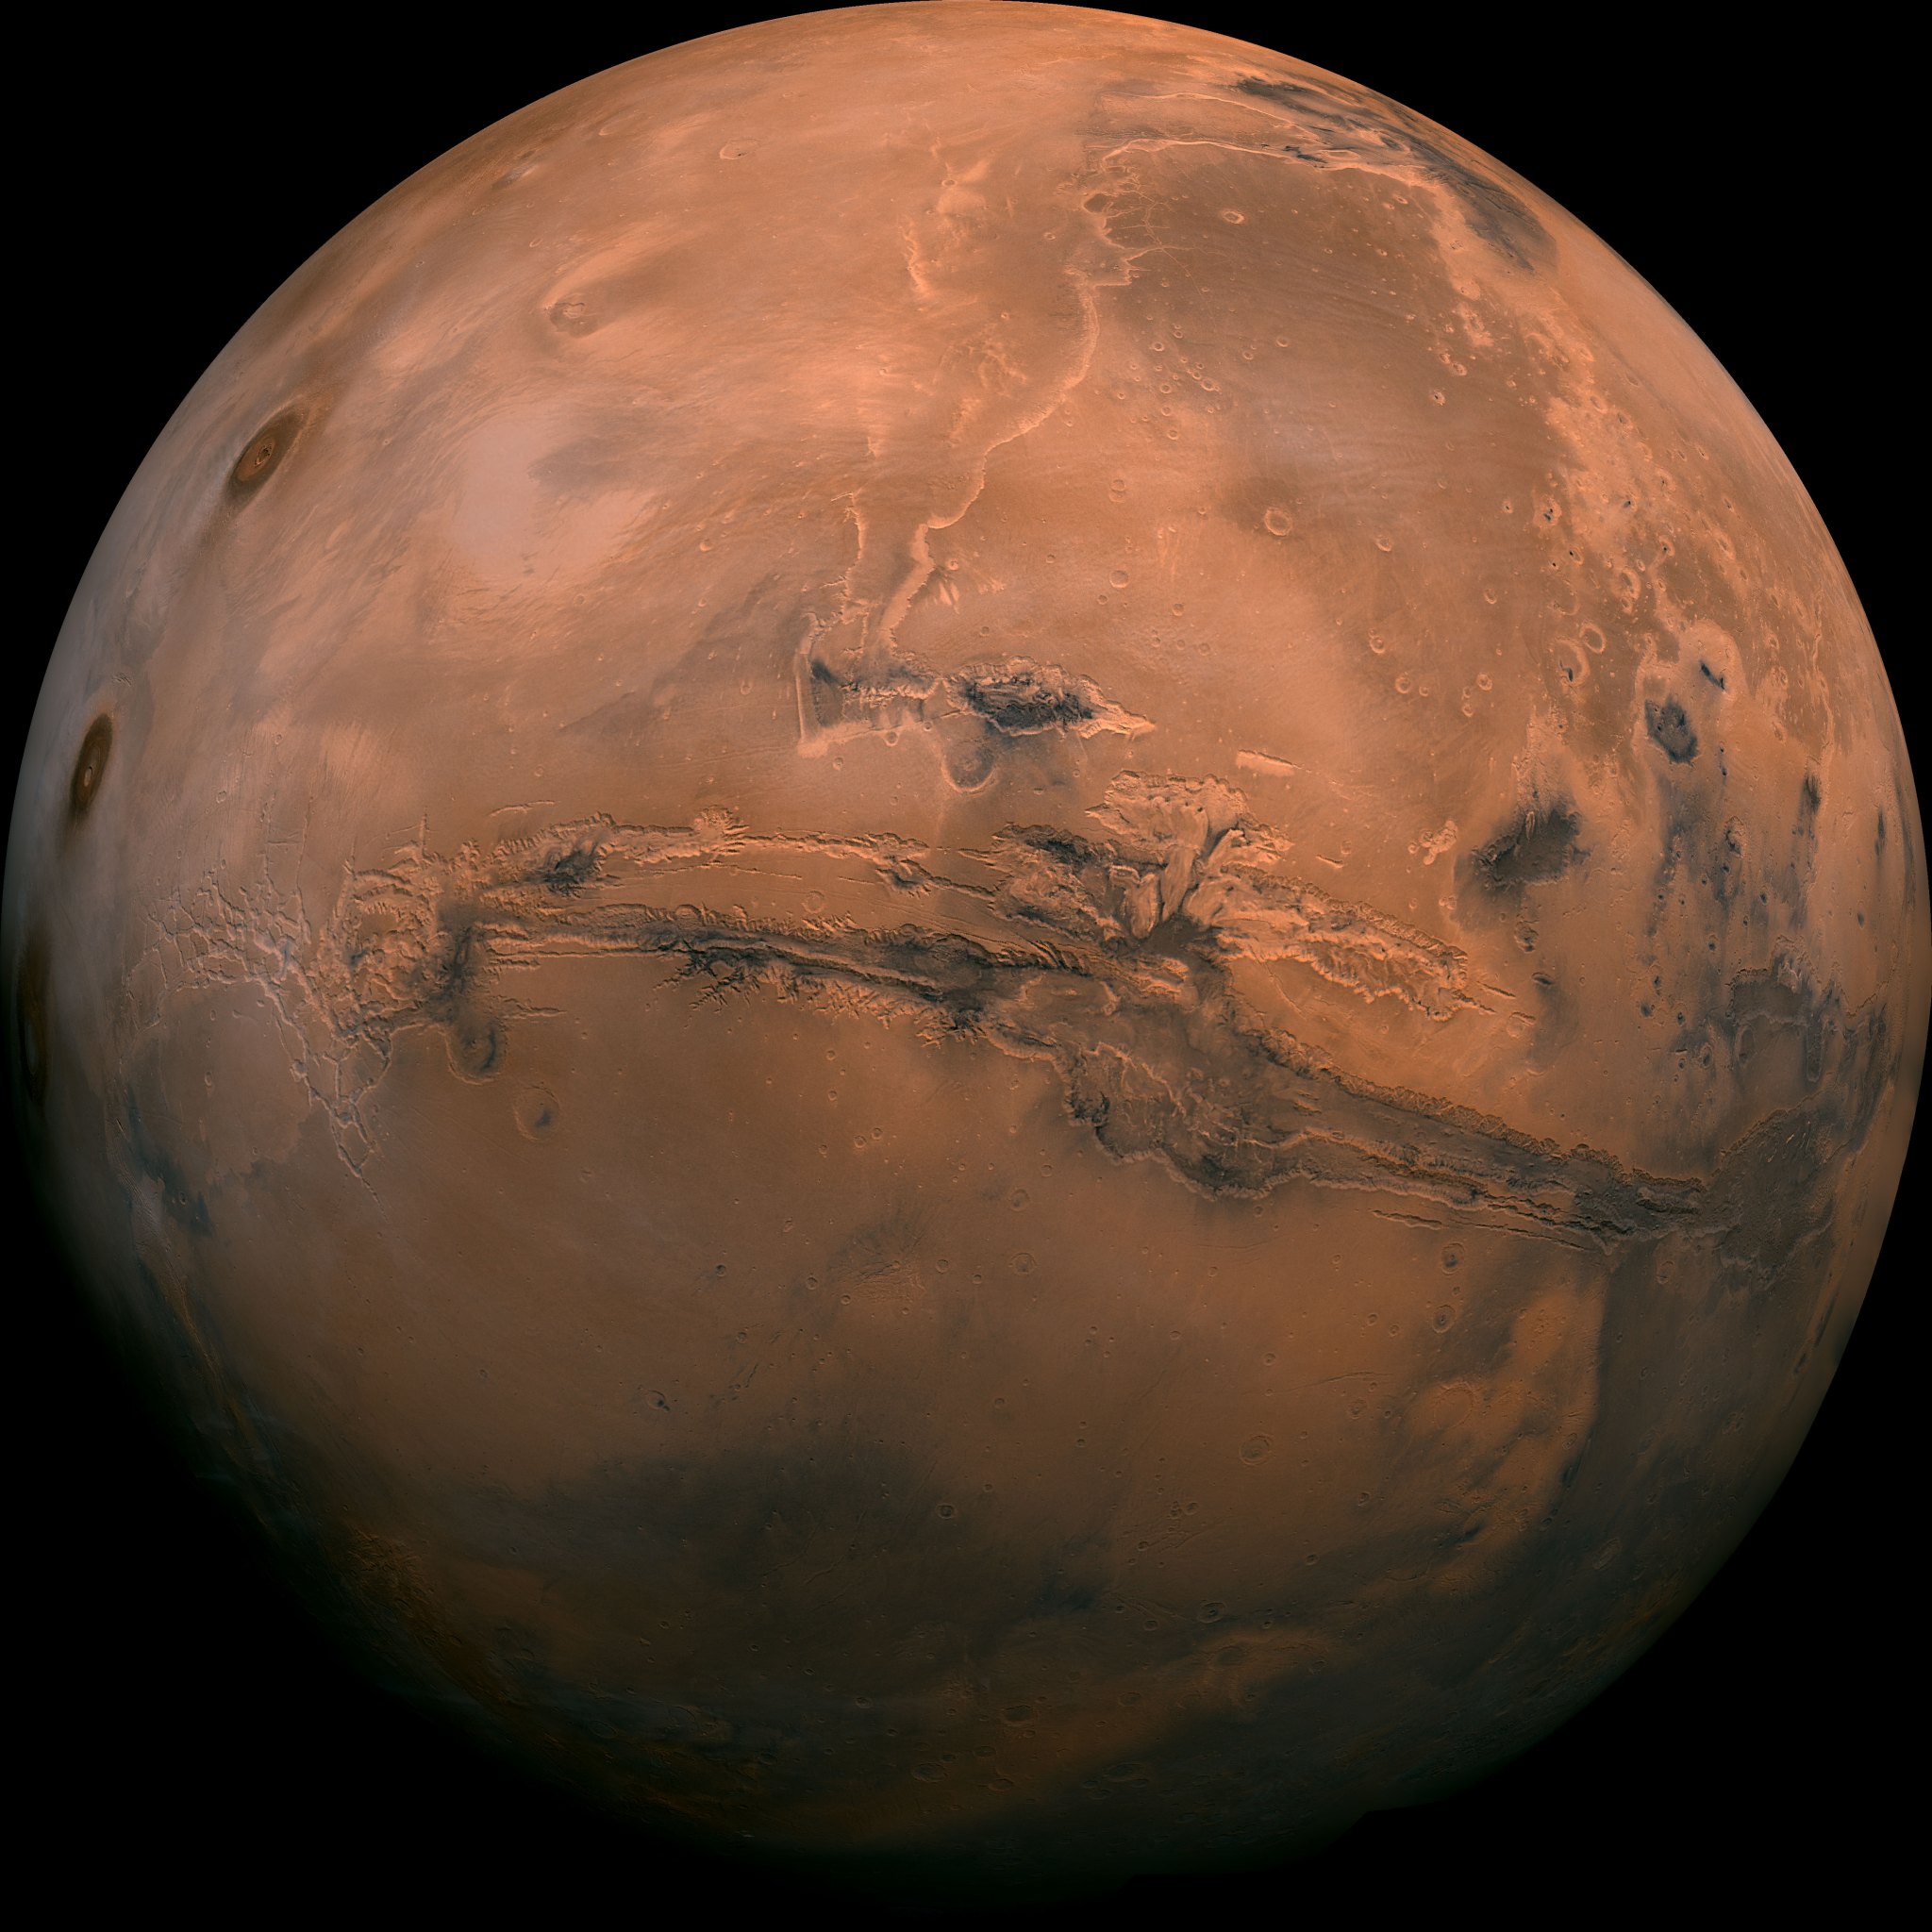 This mosaic of Mars is a compilation of images captured by the Viking Orbiter 1.